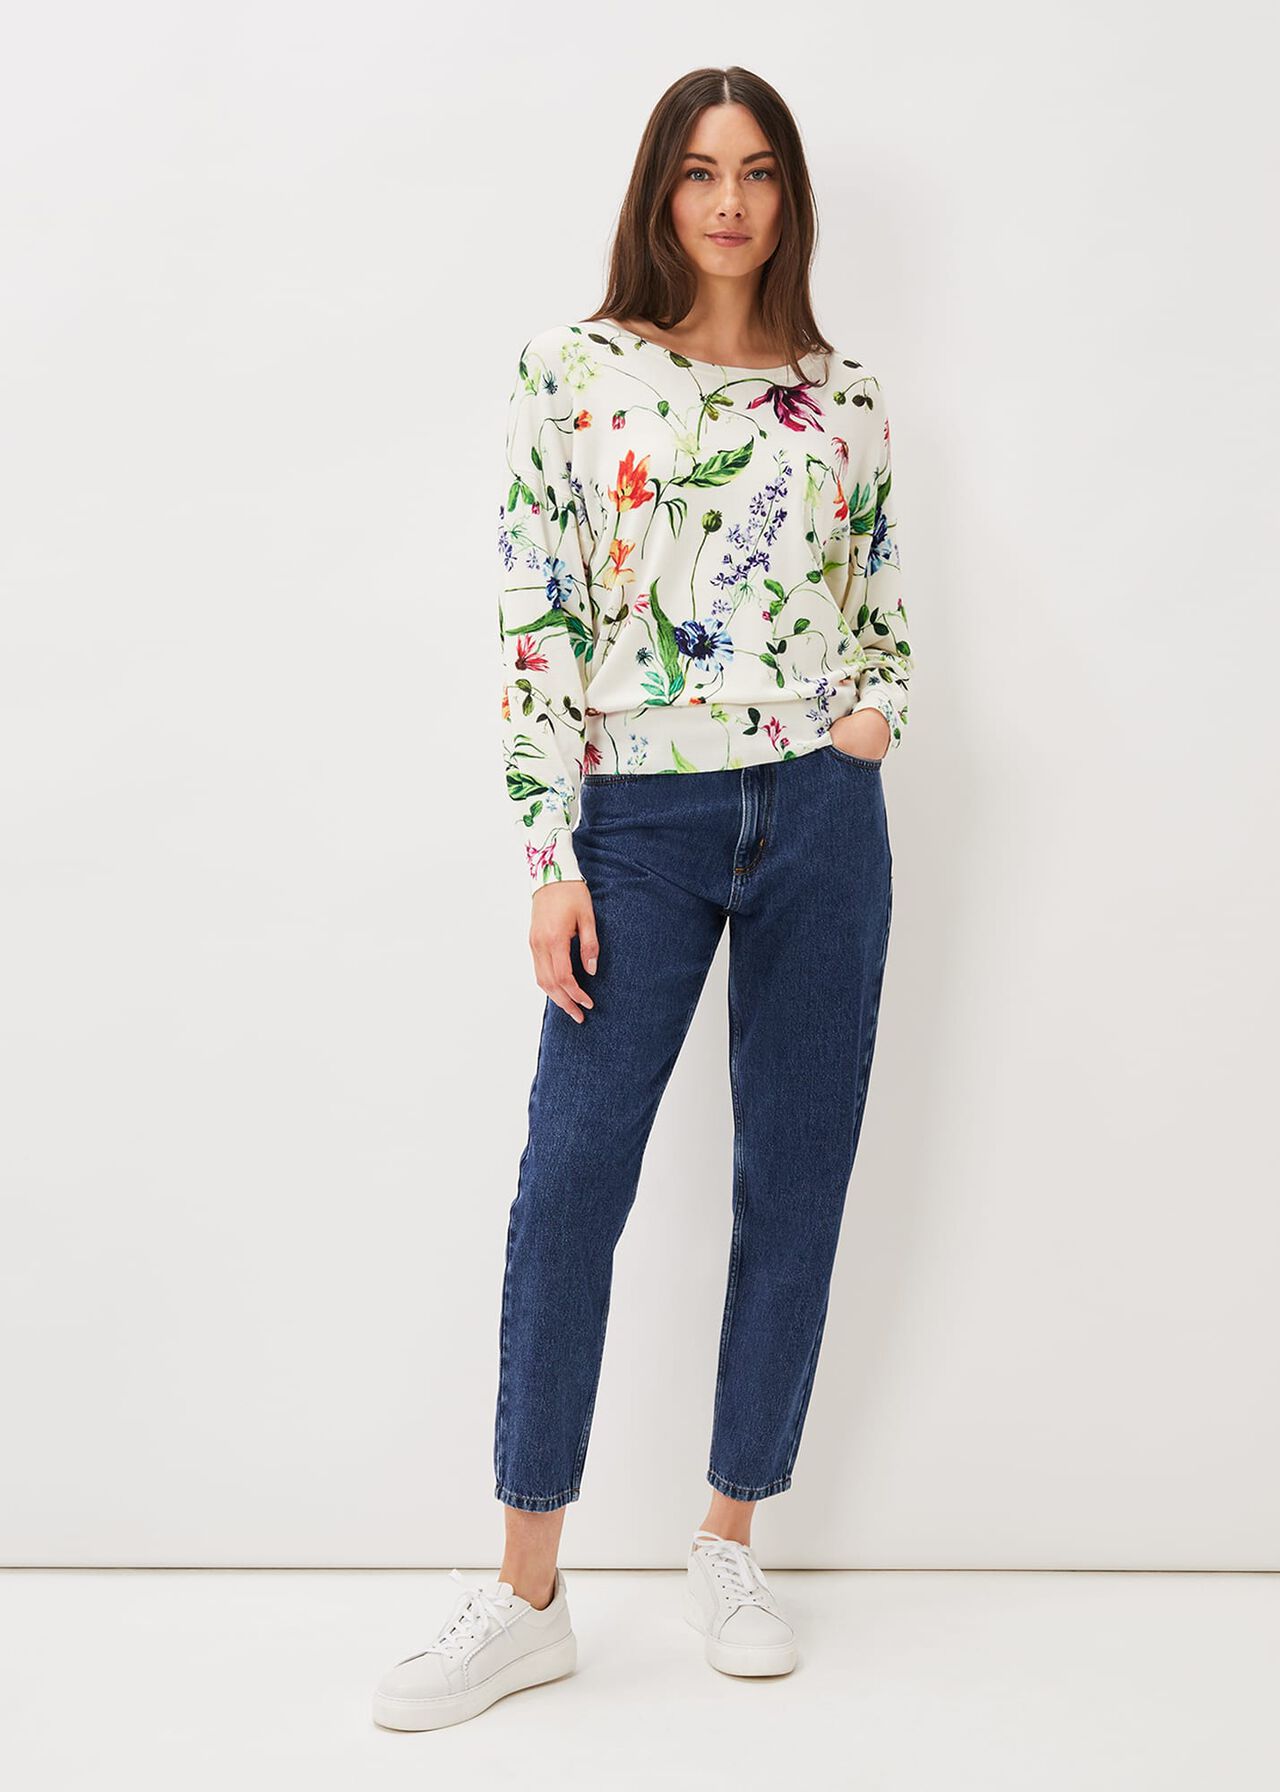 Mably Floral Print Knit